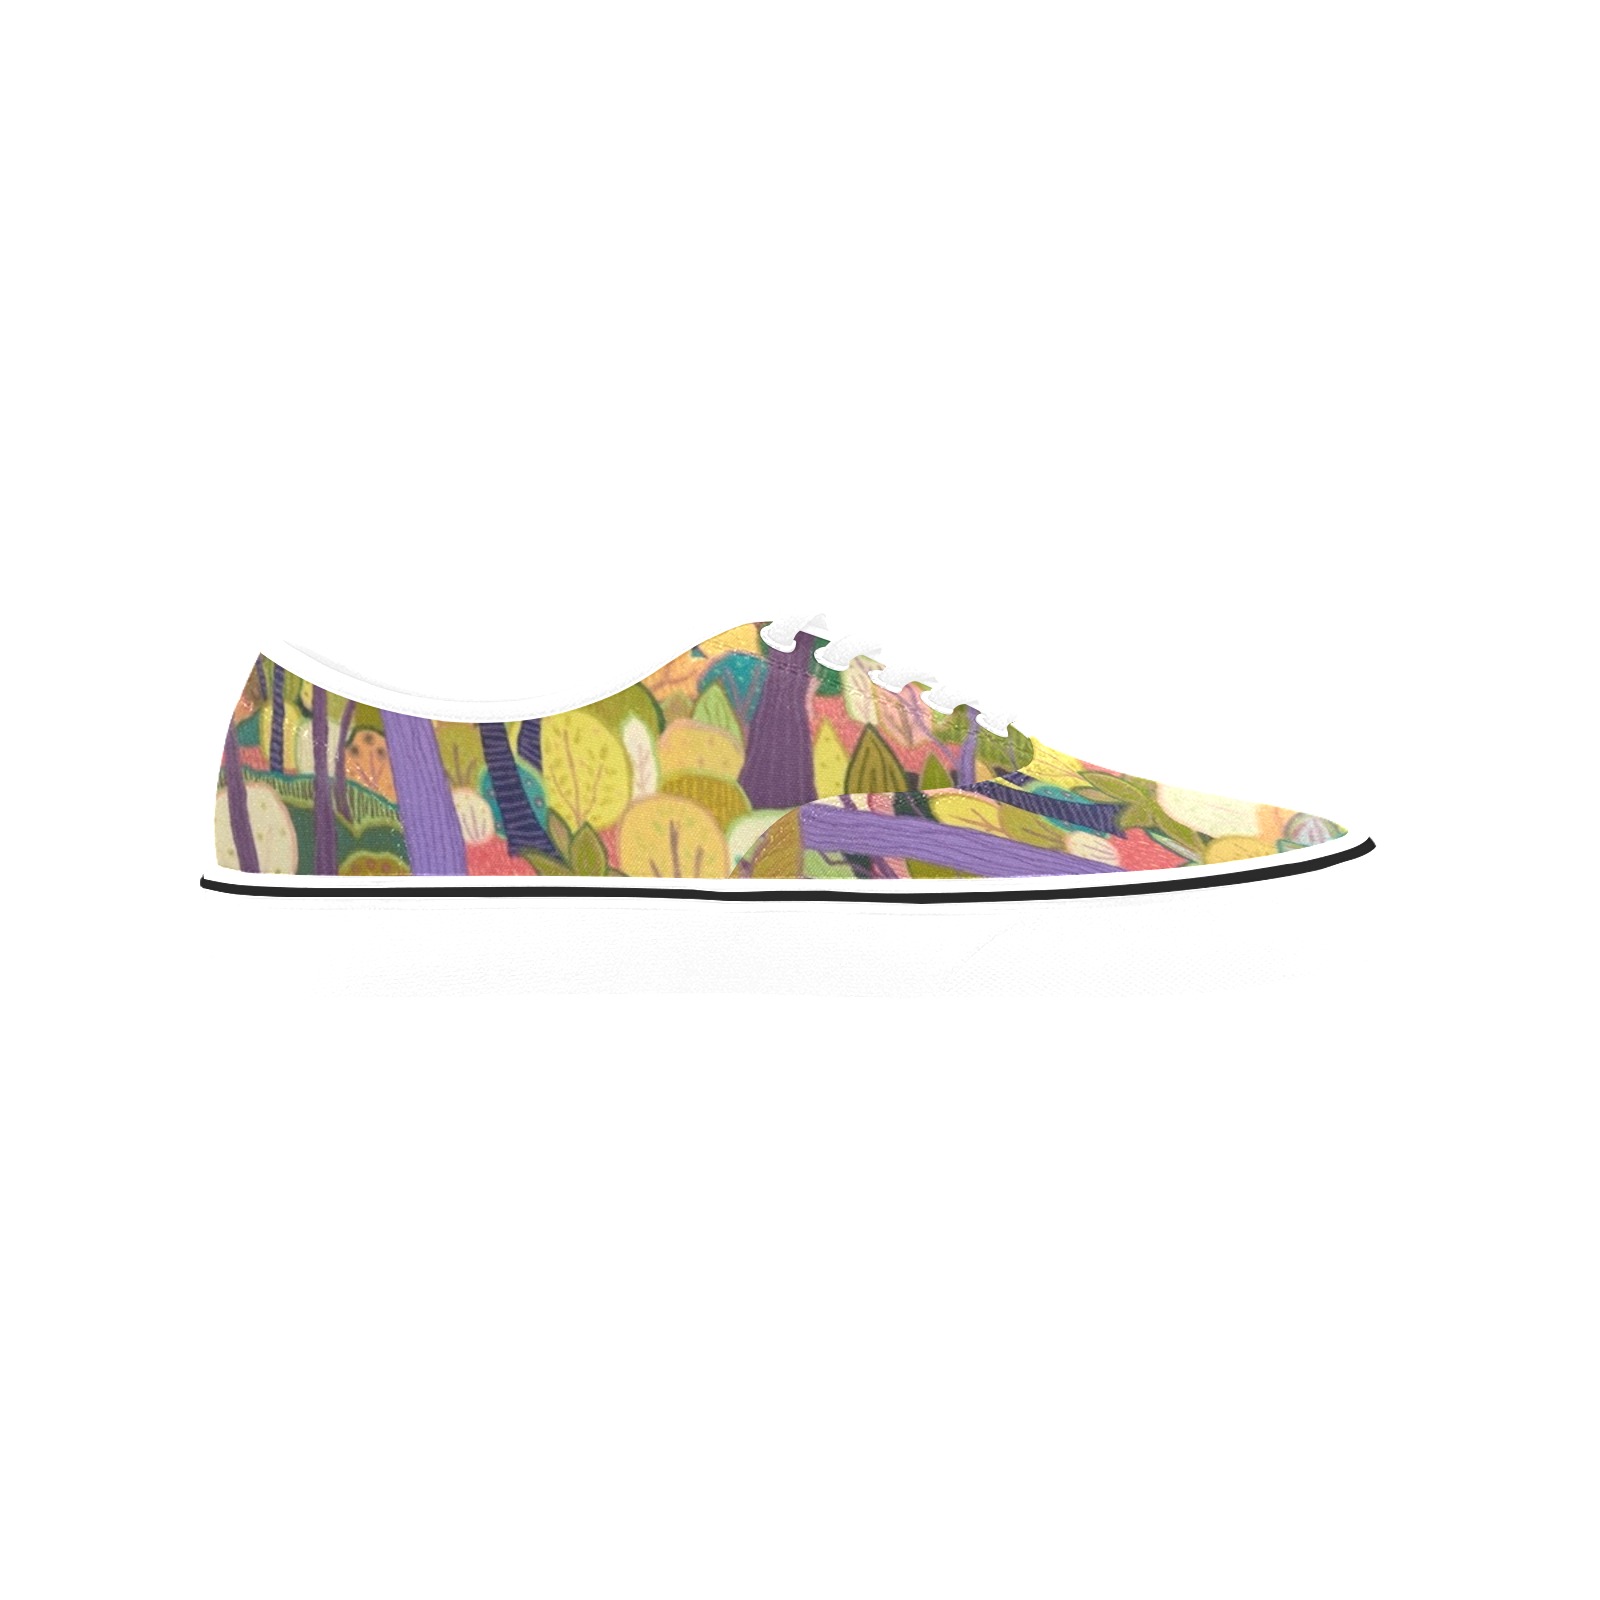 One Night in Tlaxcala Classic Men's Canvas Low Top Shoes (Model E001-4)